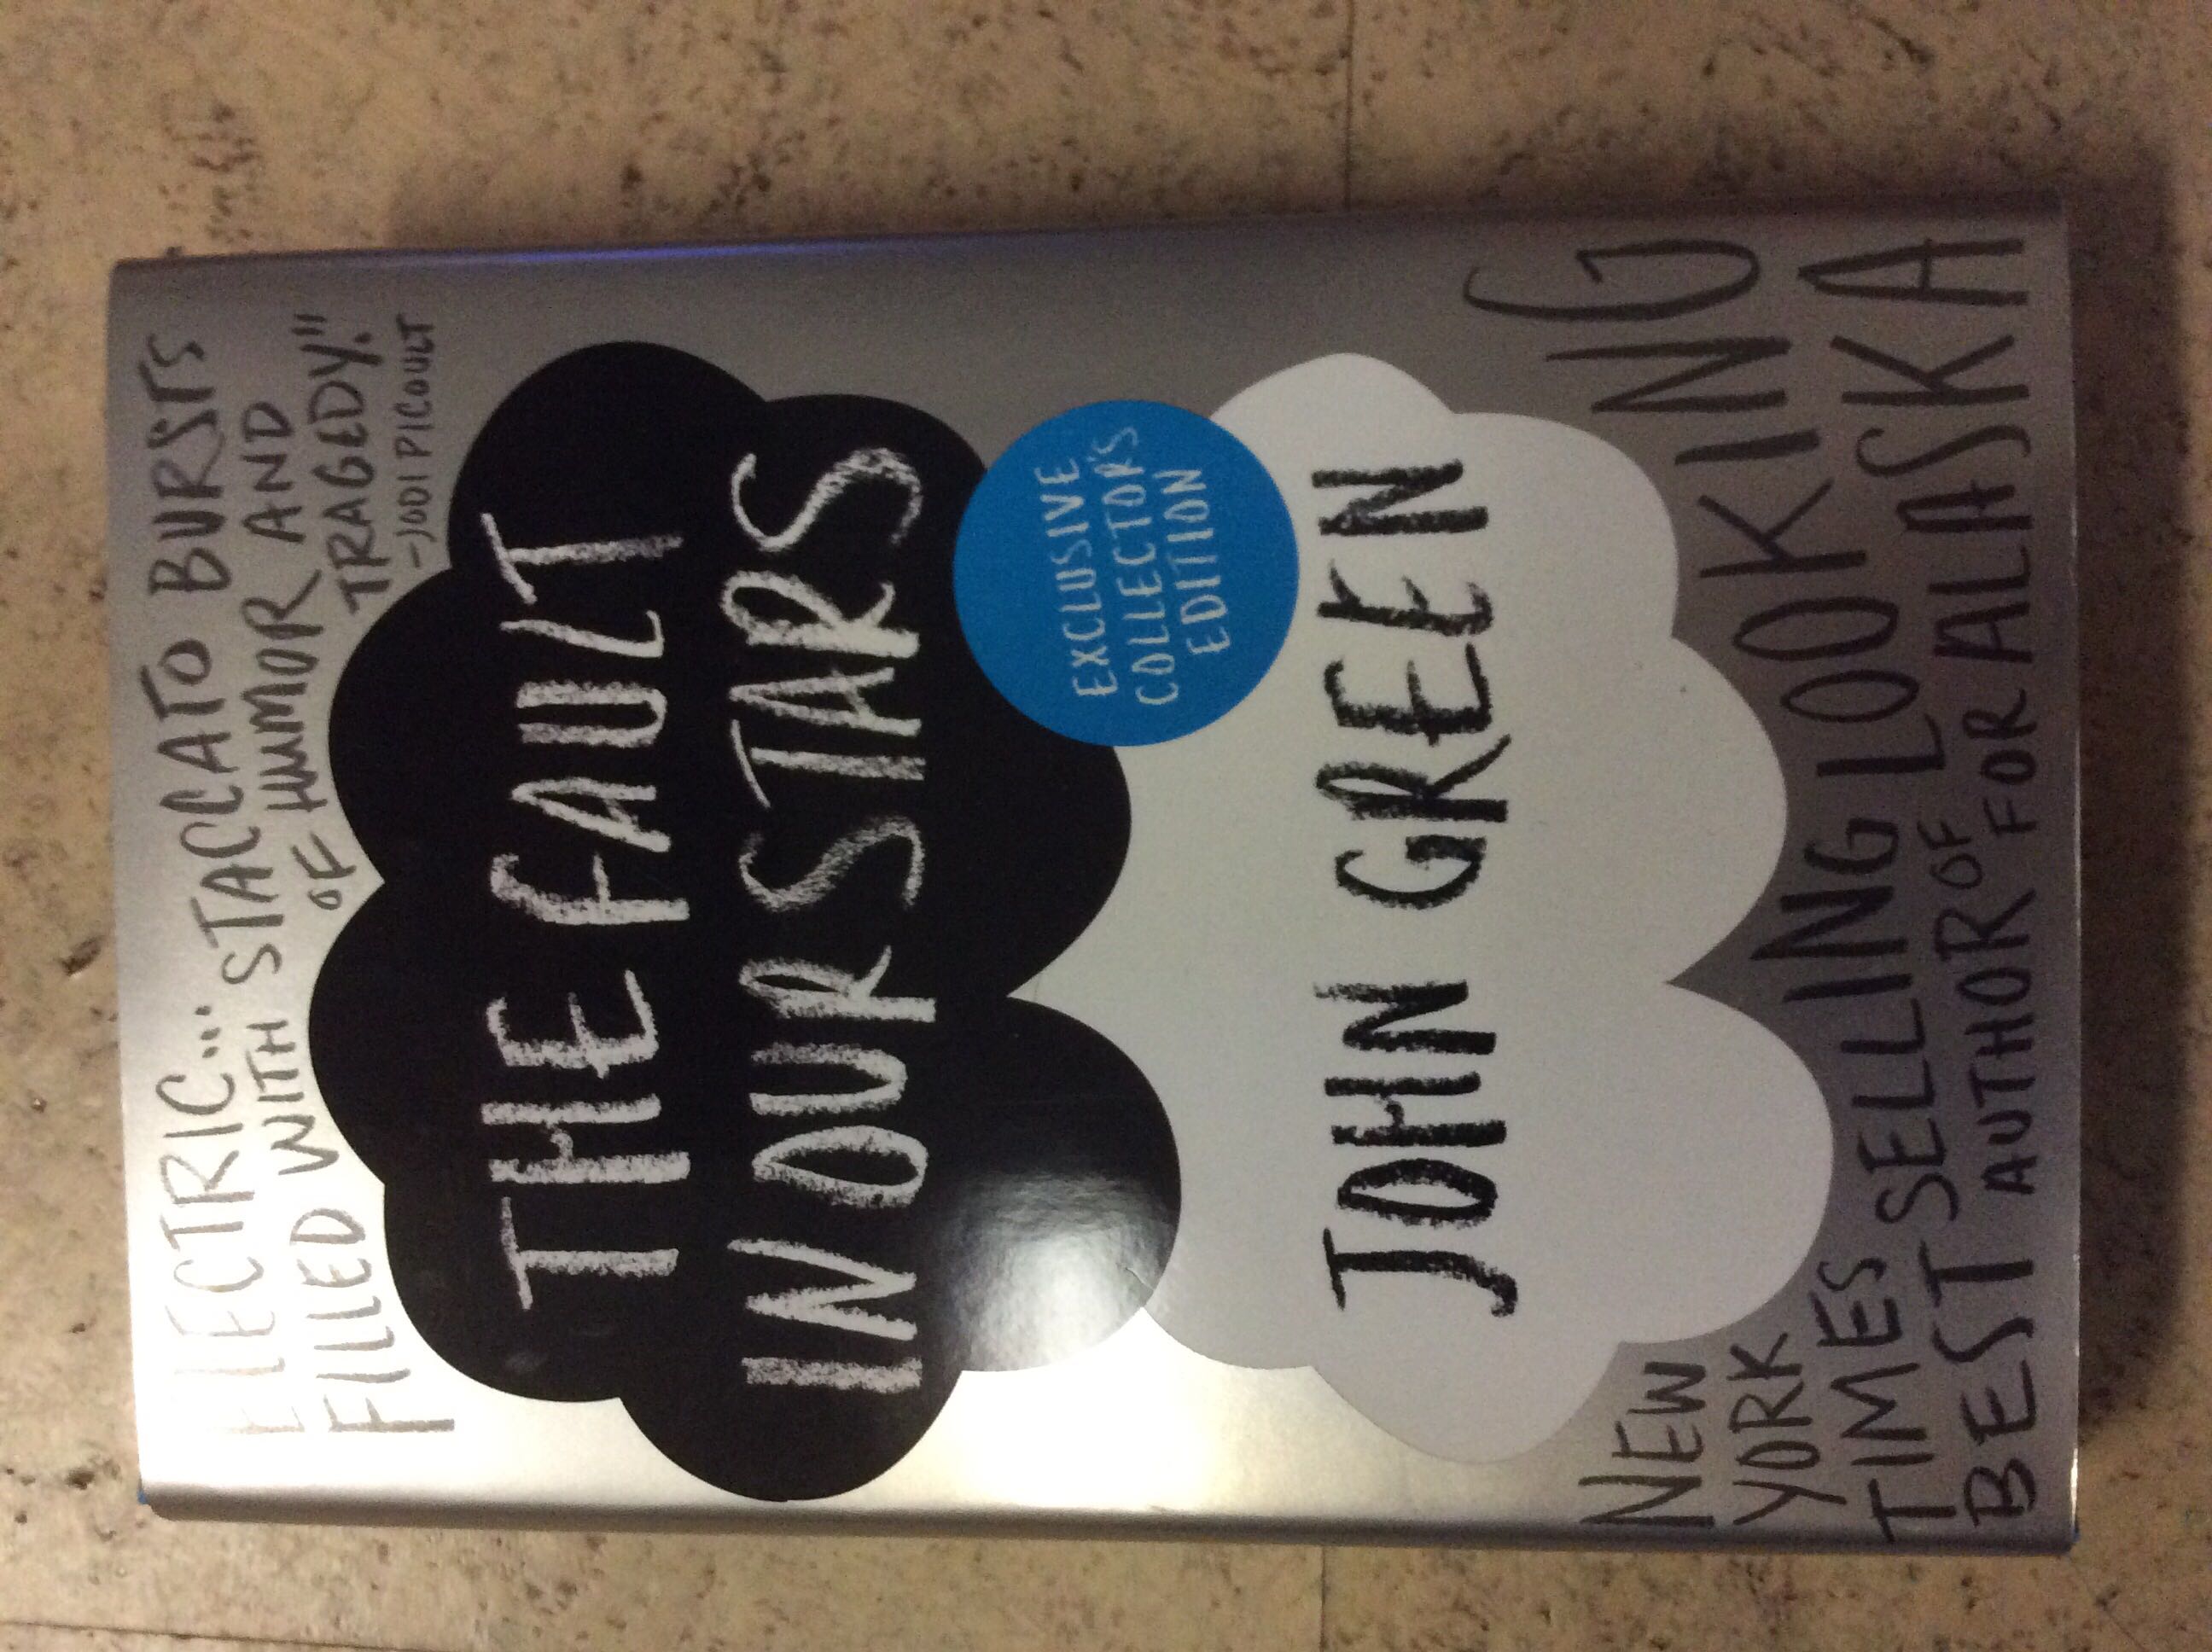 The Fault In Our Stars - John Green (A Dutton Book - Hardcover) book collectible [Barcode 9780525426417] - Main Image 3